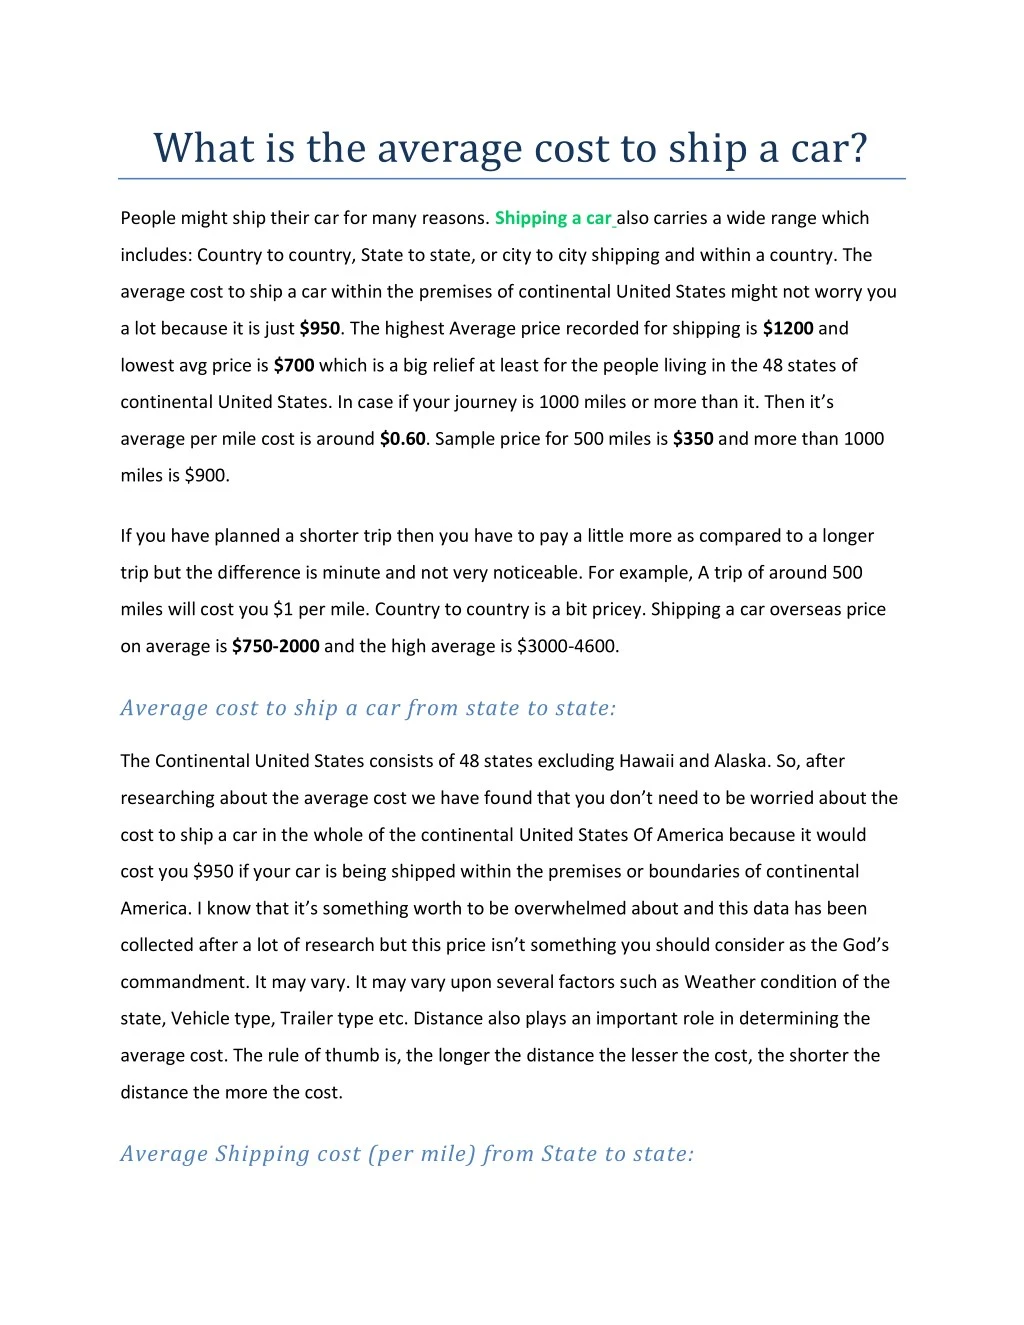 what is the average cost to ship a car